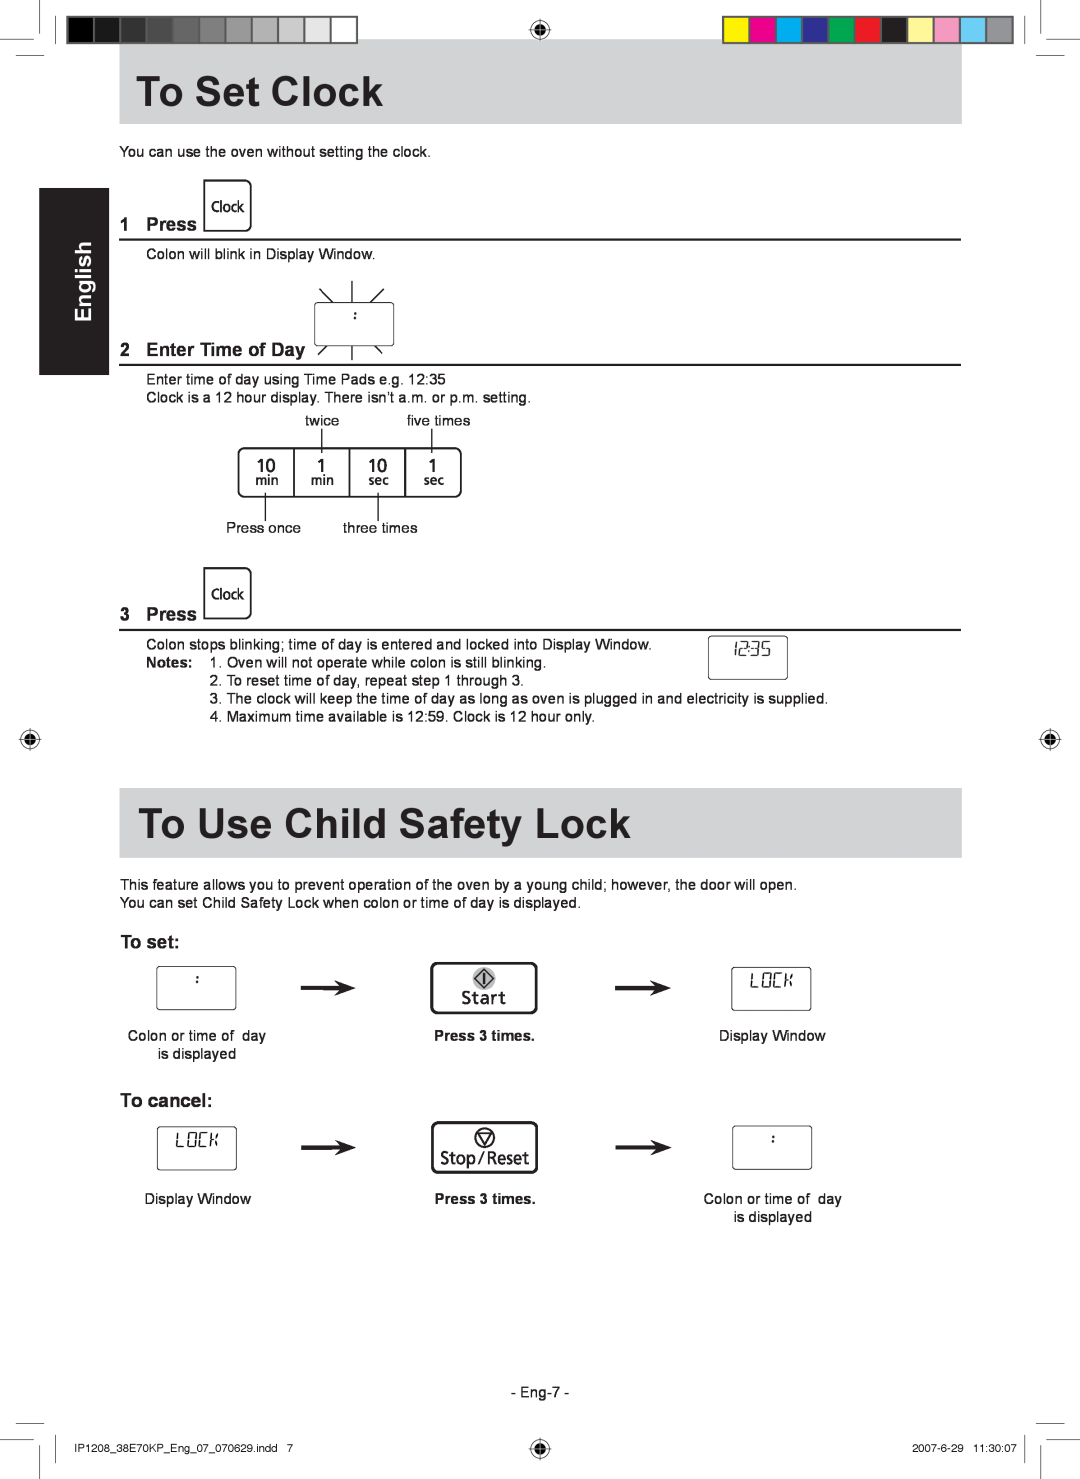 Panasonic NN-ST757W manual To Set Clock, To Use Child Safety Lock, Press, Enter Time of Day, To set, English, To cancel 